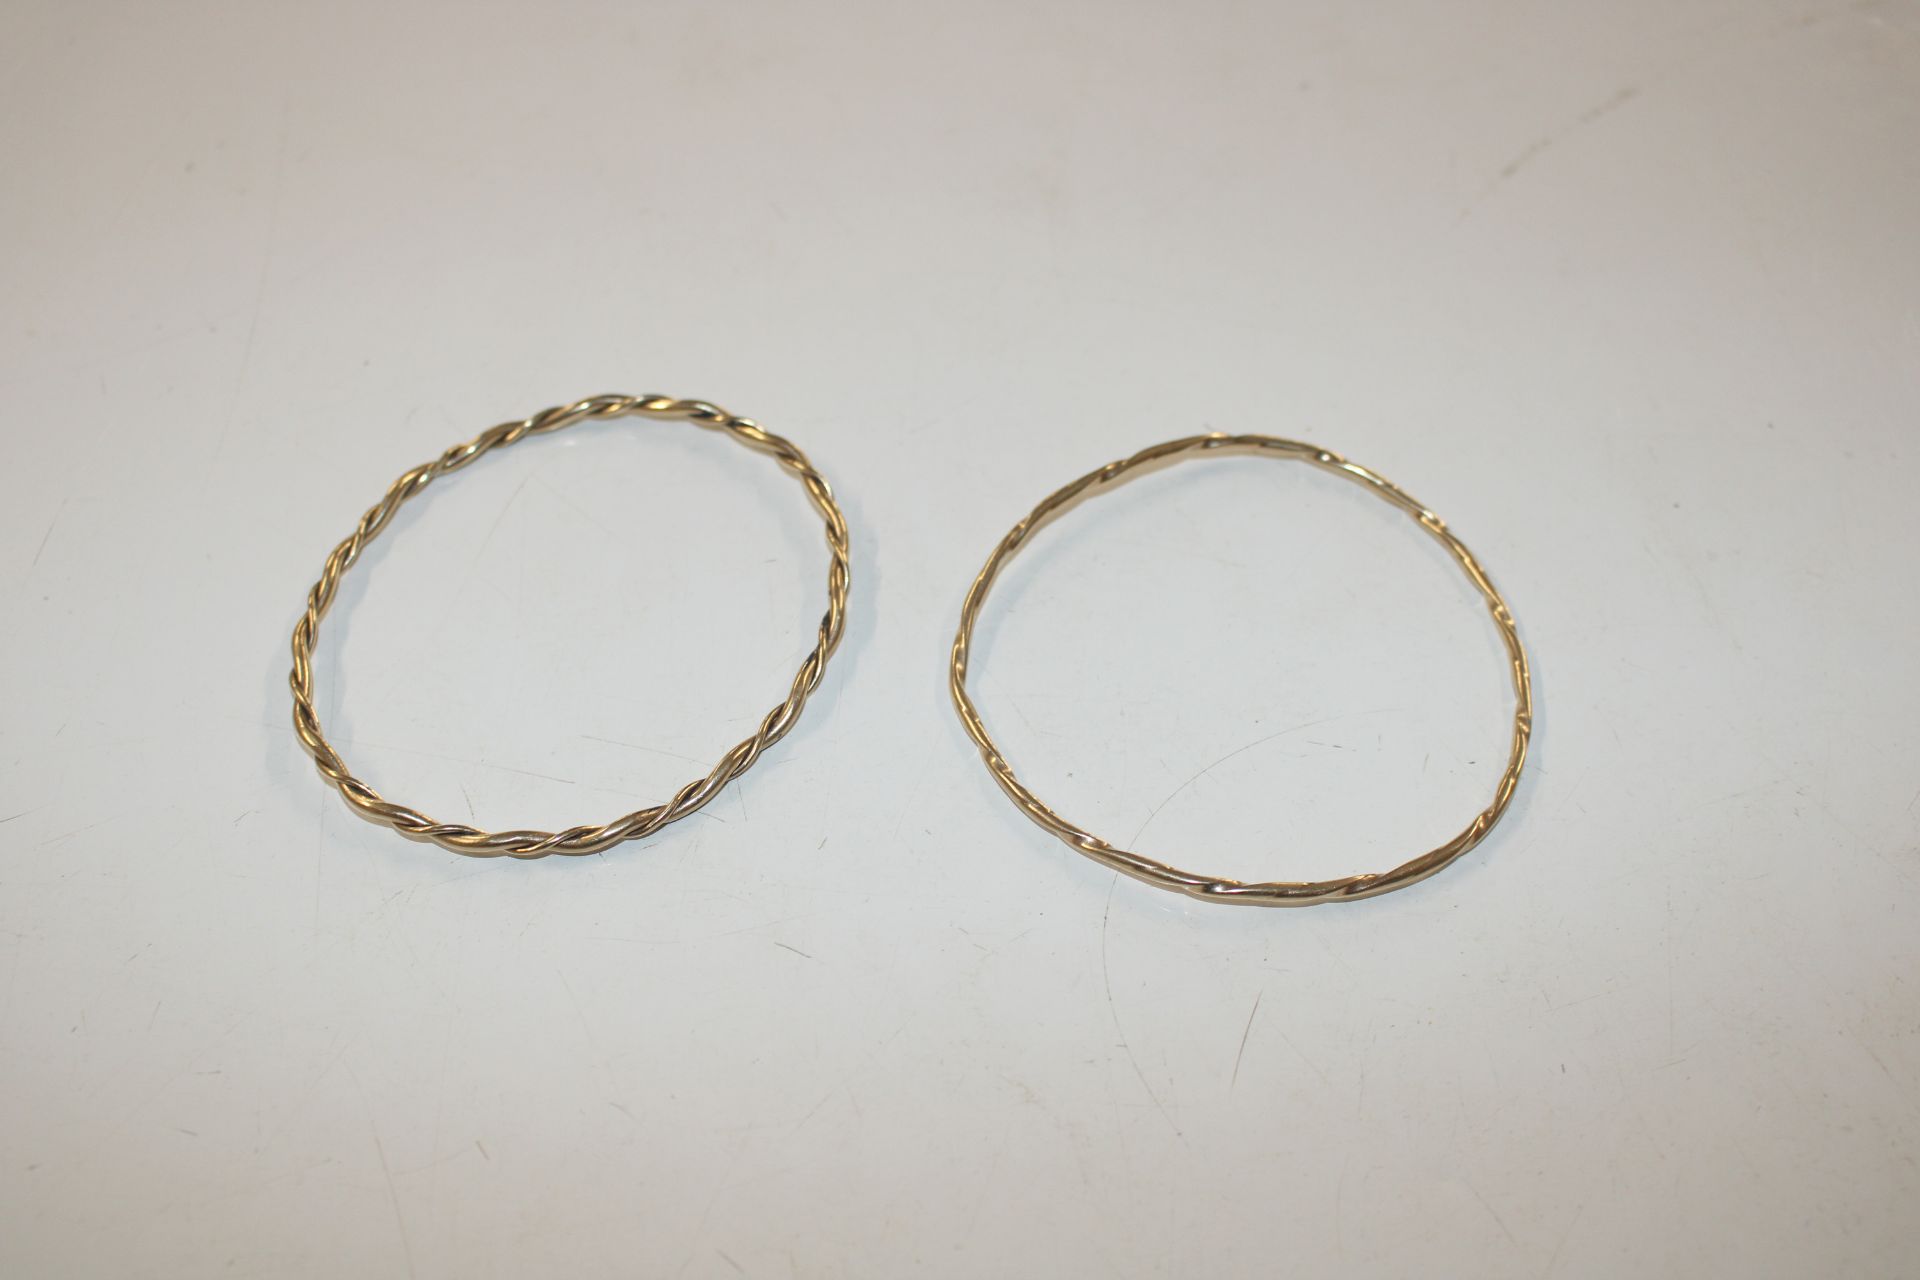 A near pair of 9ct gold bangles, total weight appr